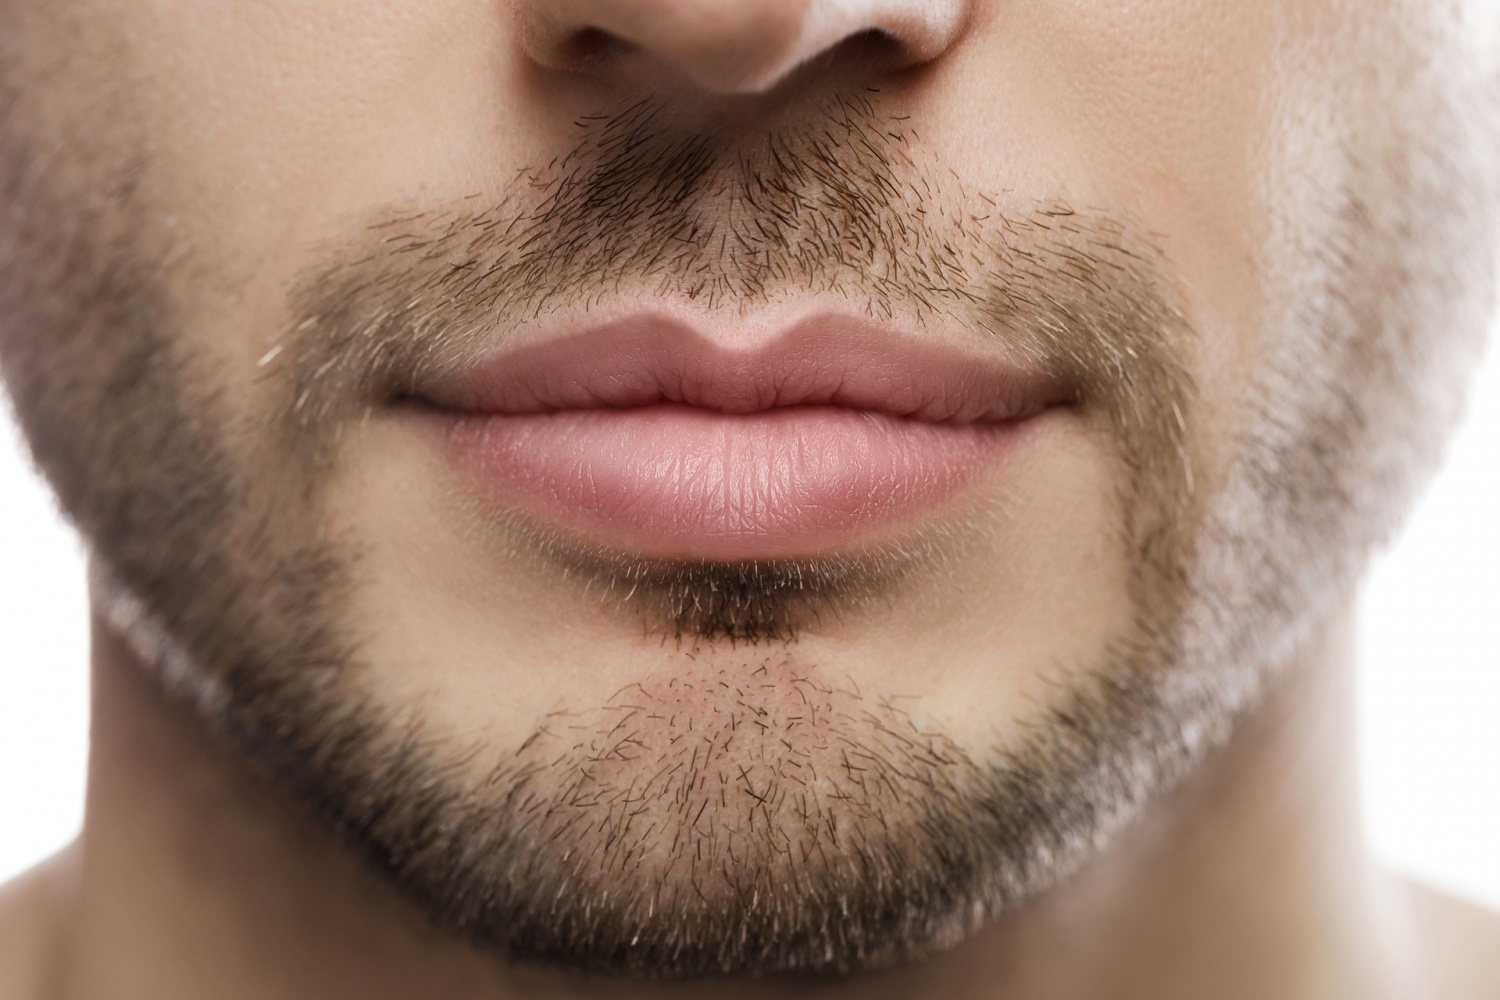 Get the 3-Day Stubble Beard Look With These Simple Steps